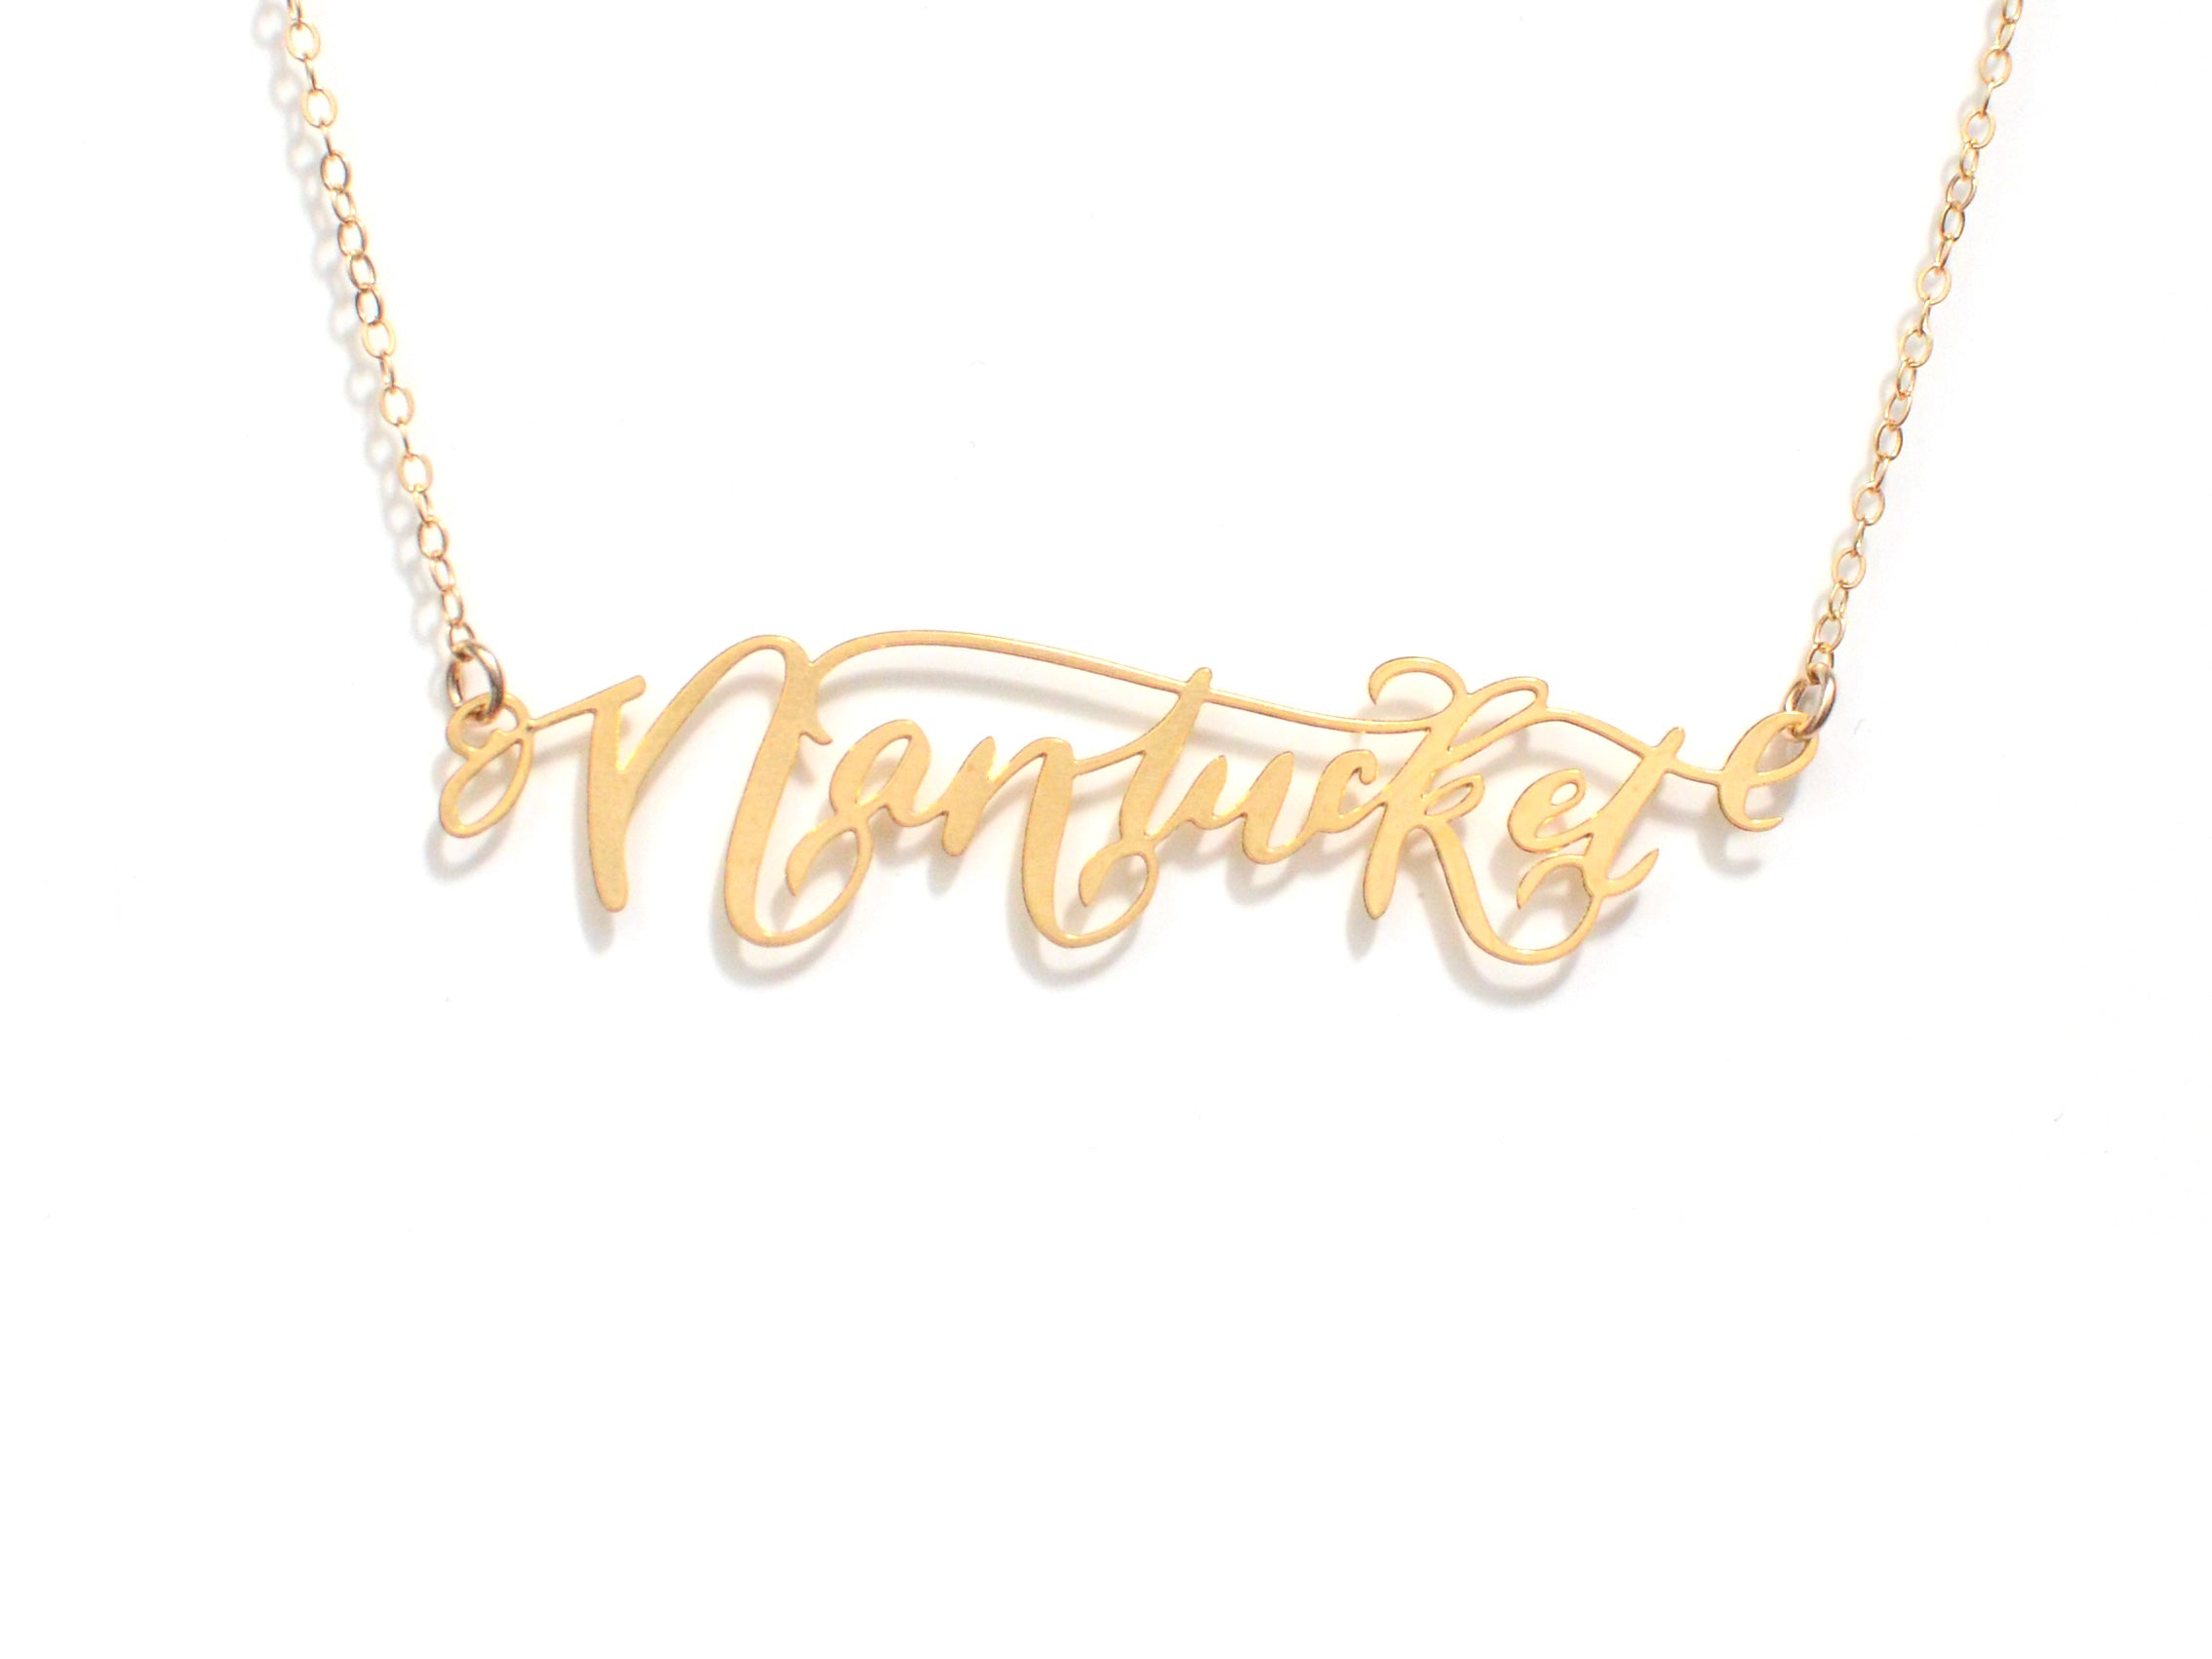 Nantucket City Love Necklace - High Quality, Hand Lettered, Calligraphy City Necklace - Your Favorite City - Available in Gold and Silver - Made in USA - Brevity Jewelry